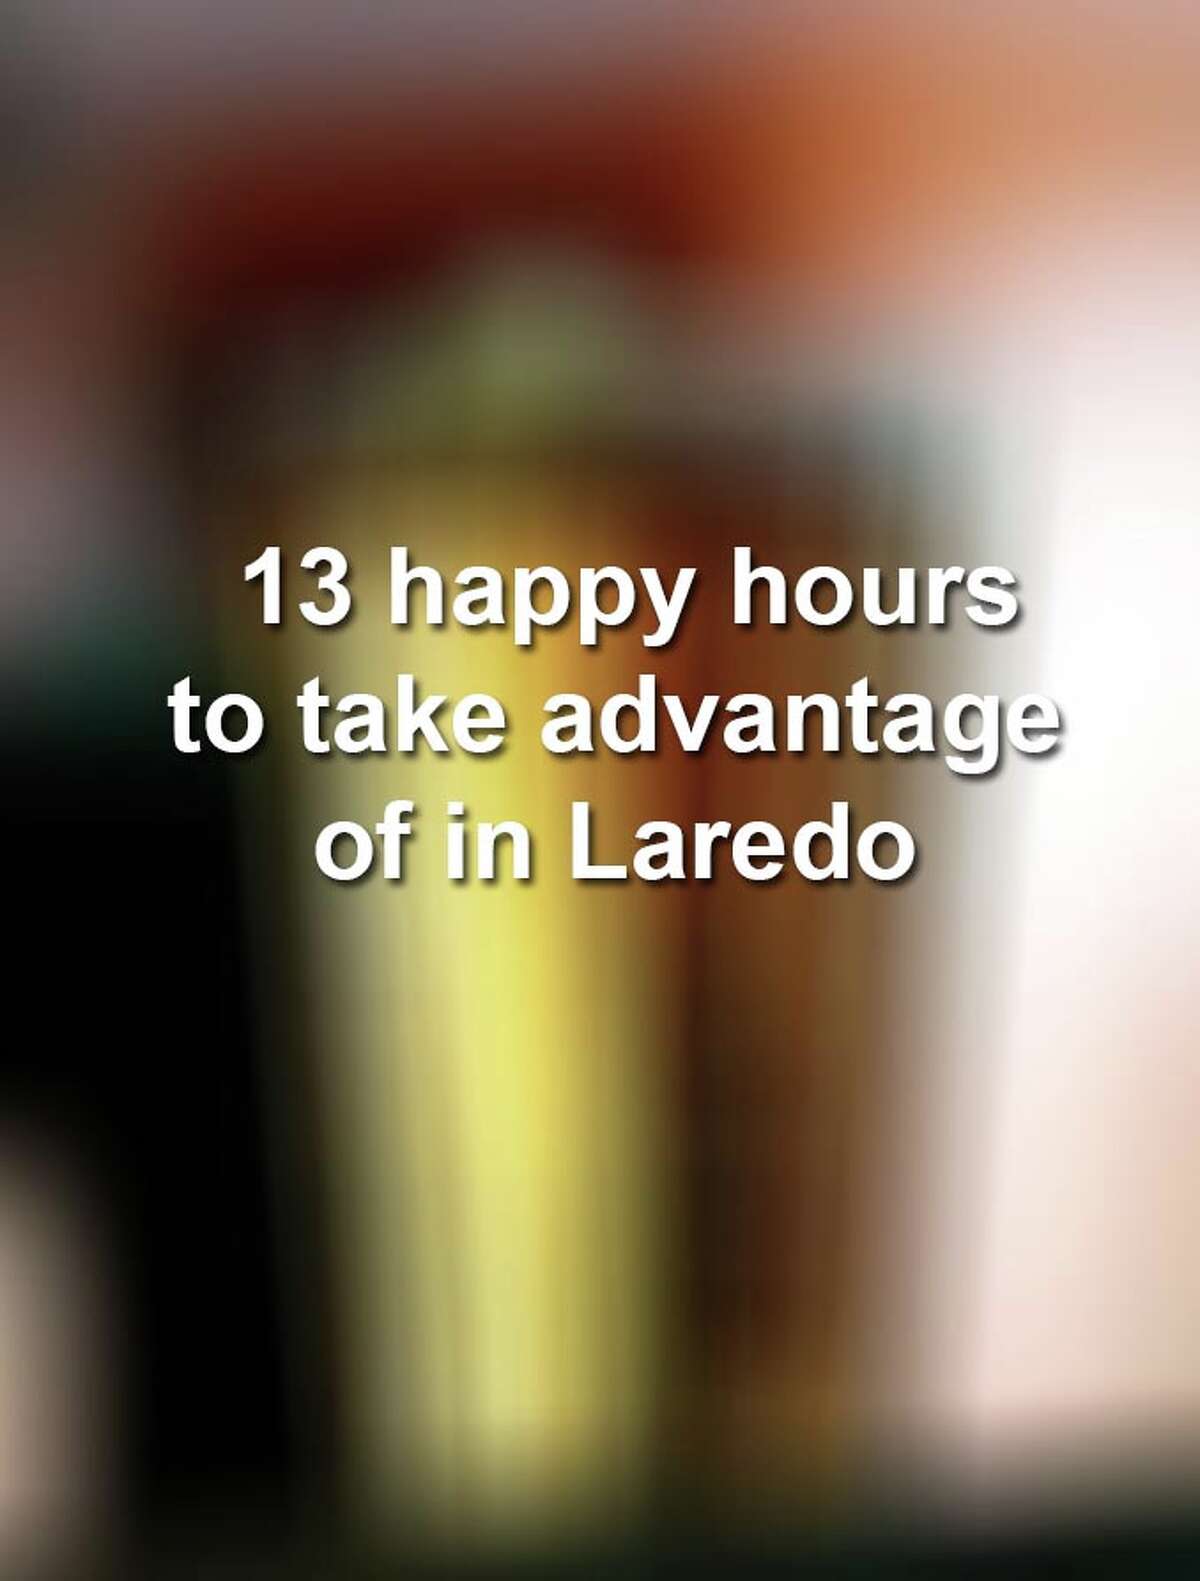 Keep scrolling to see some of the best happy hours offered in Laredo. 